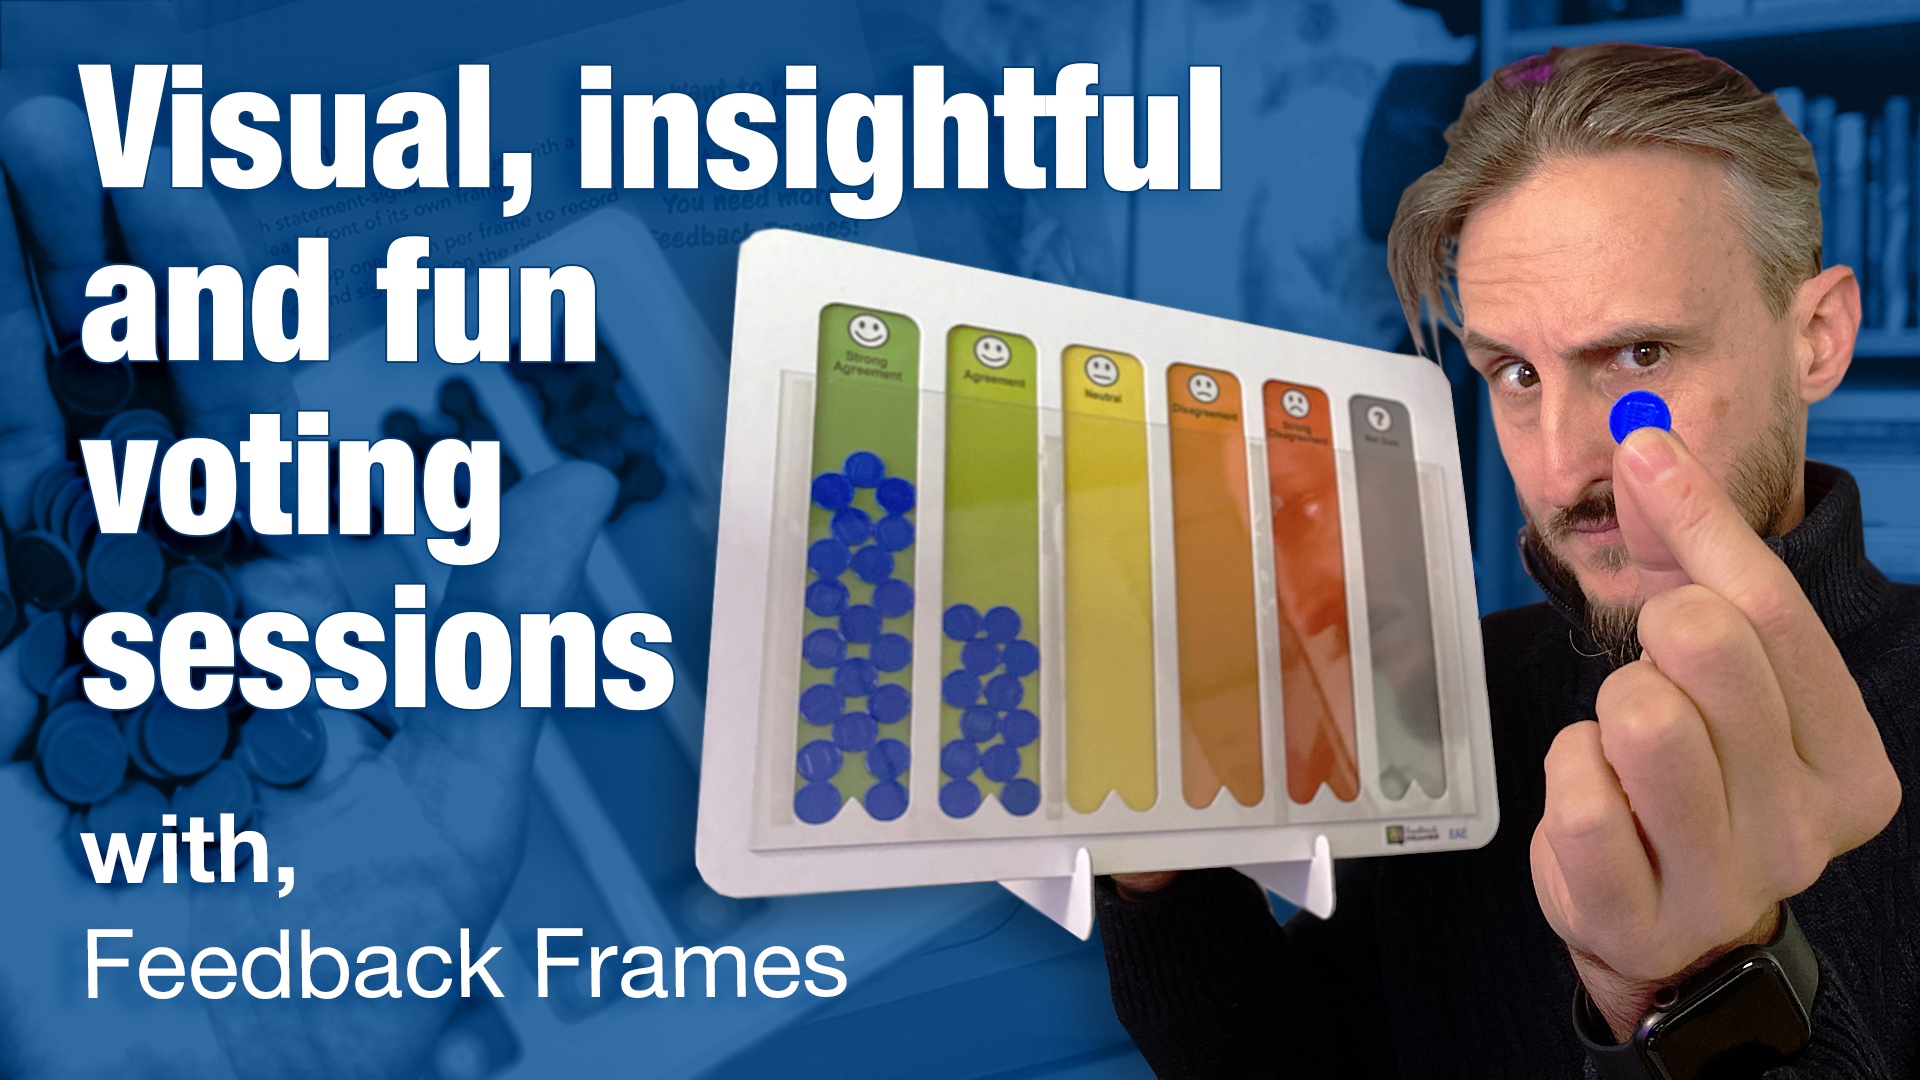 Make voting sessions visual, insightful and fun with Feedback Frames